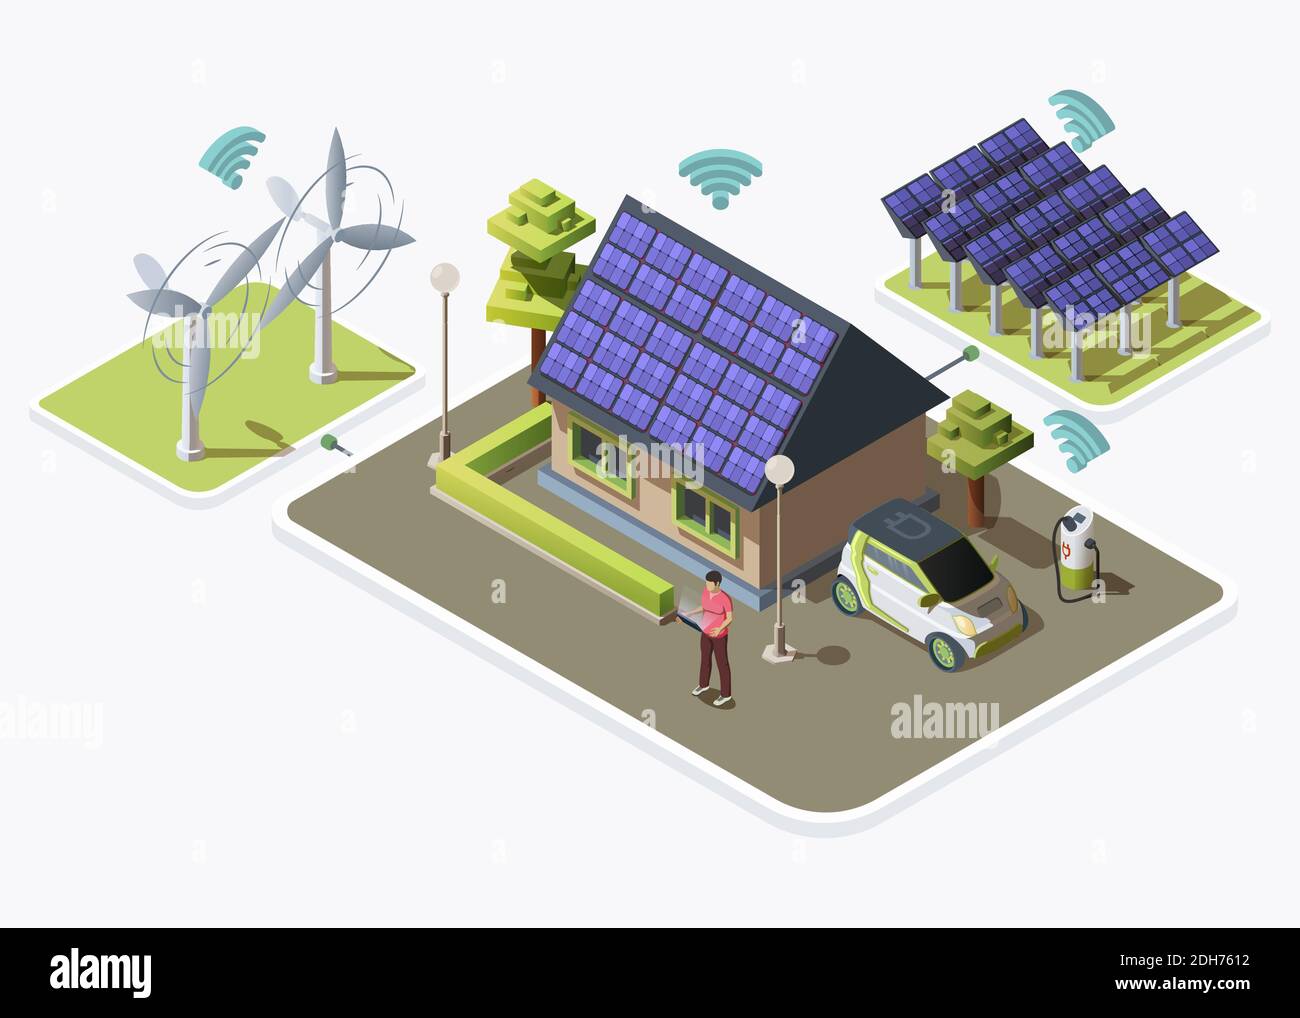 Electric car, smart house connected to alternative energy sources produced by wind turbines and solar panels. Smart grid concept design. Flat isometric vector illustration isolated on white background Stock Vector